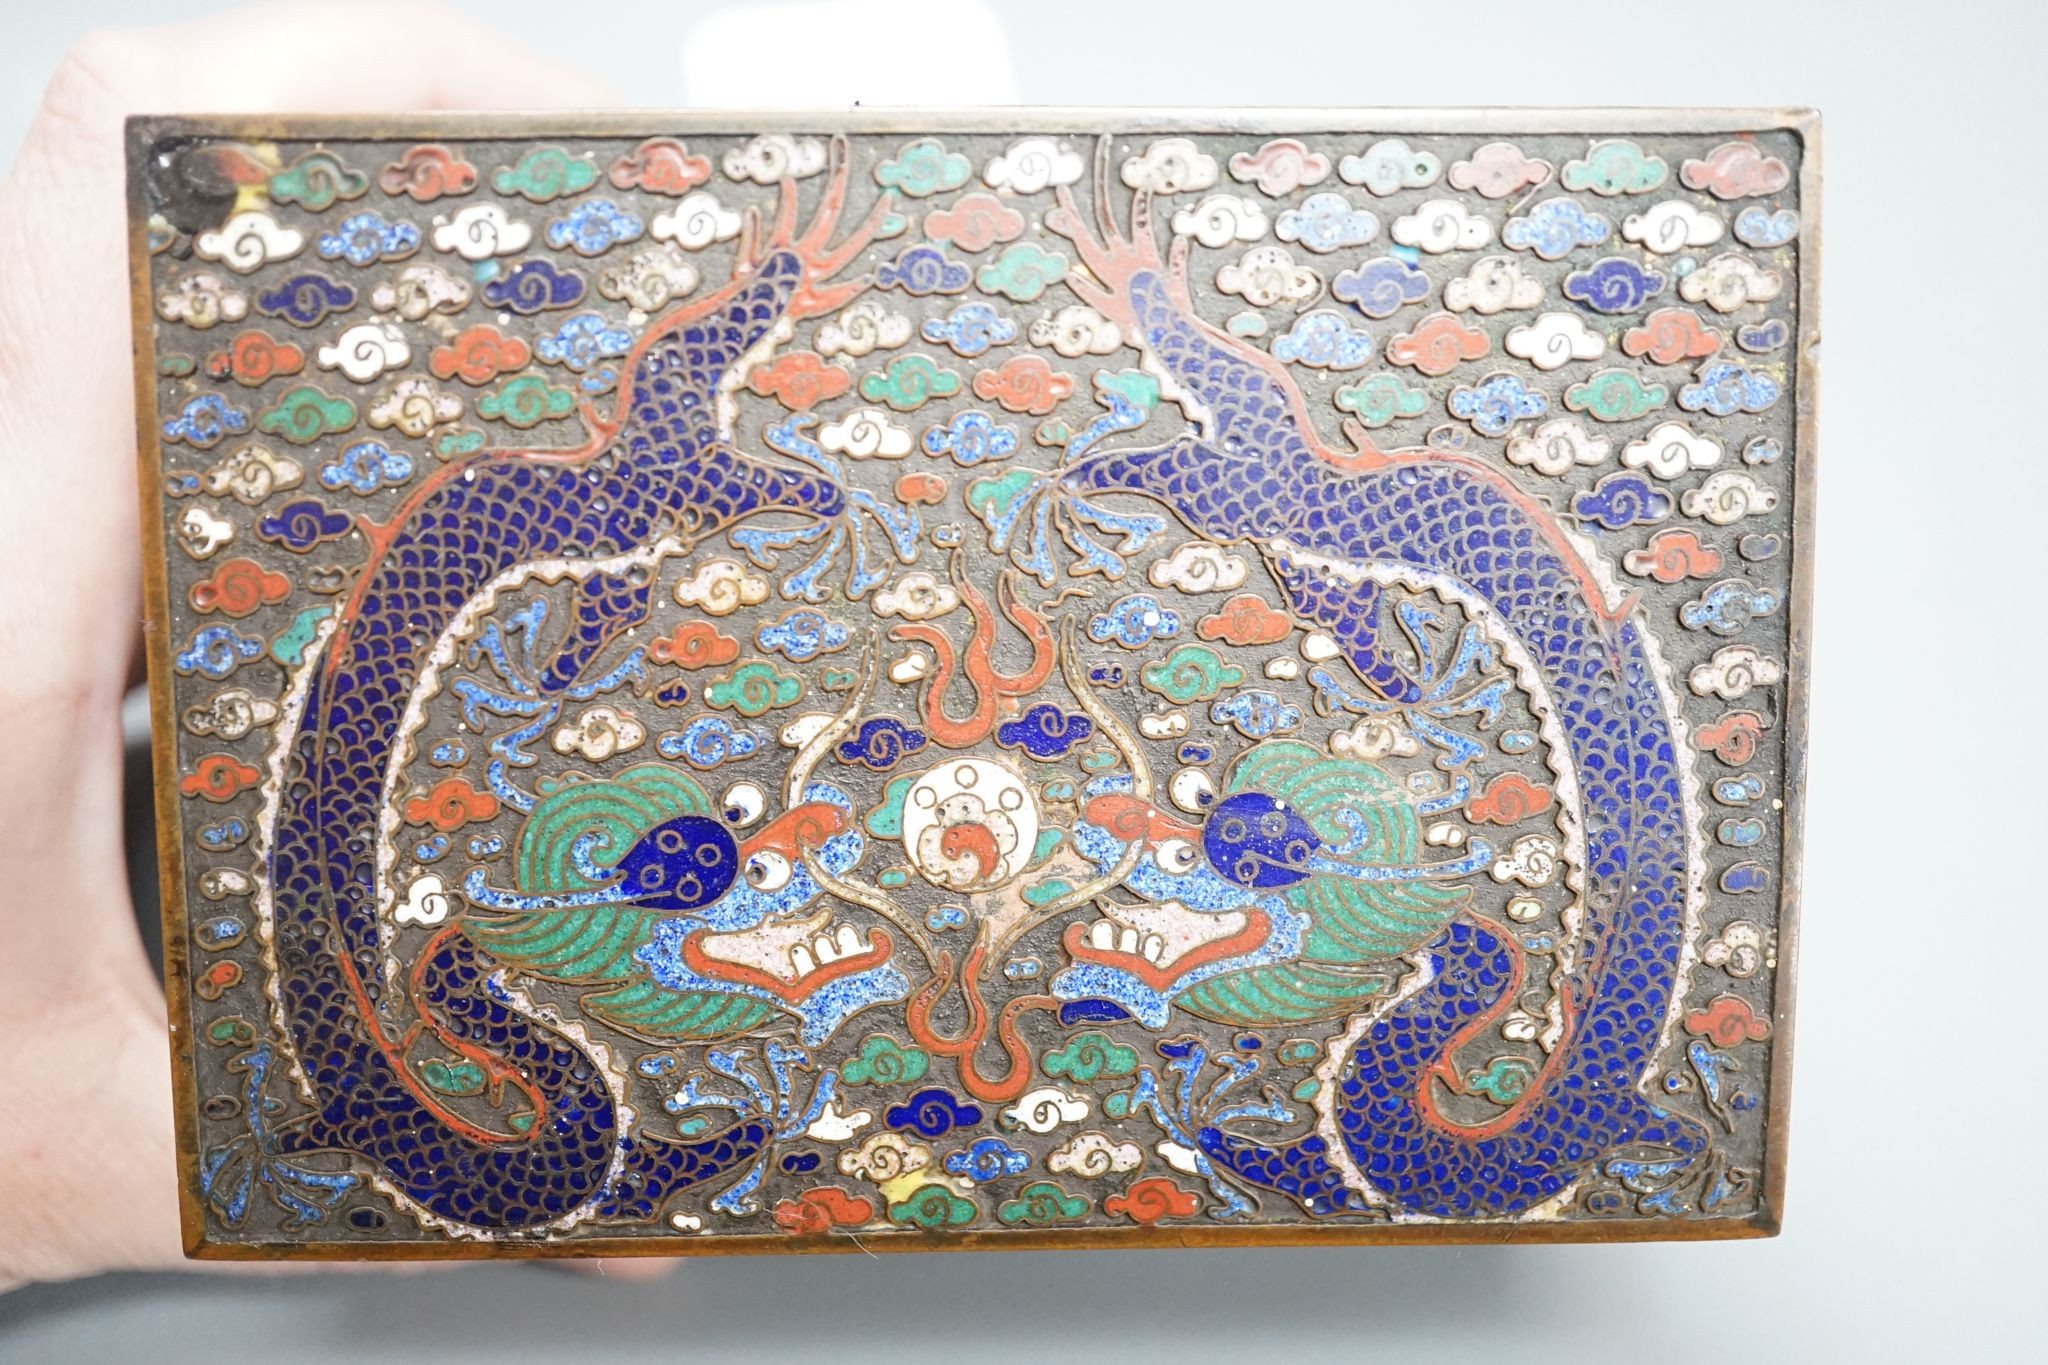 A Chinese bronze and cloisonné enamel ‘dragon’ box and cover, early 20th century, 6 cms high x 11.5 cms wide.